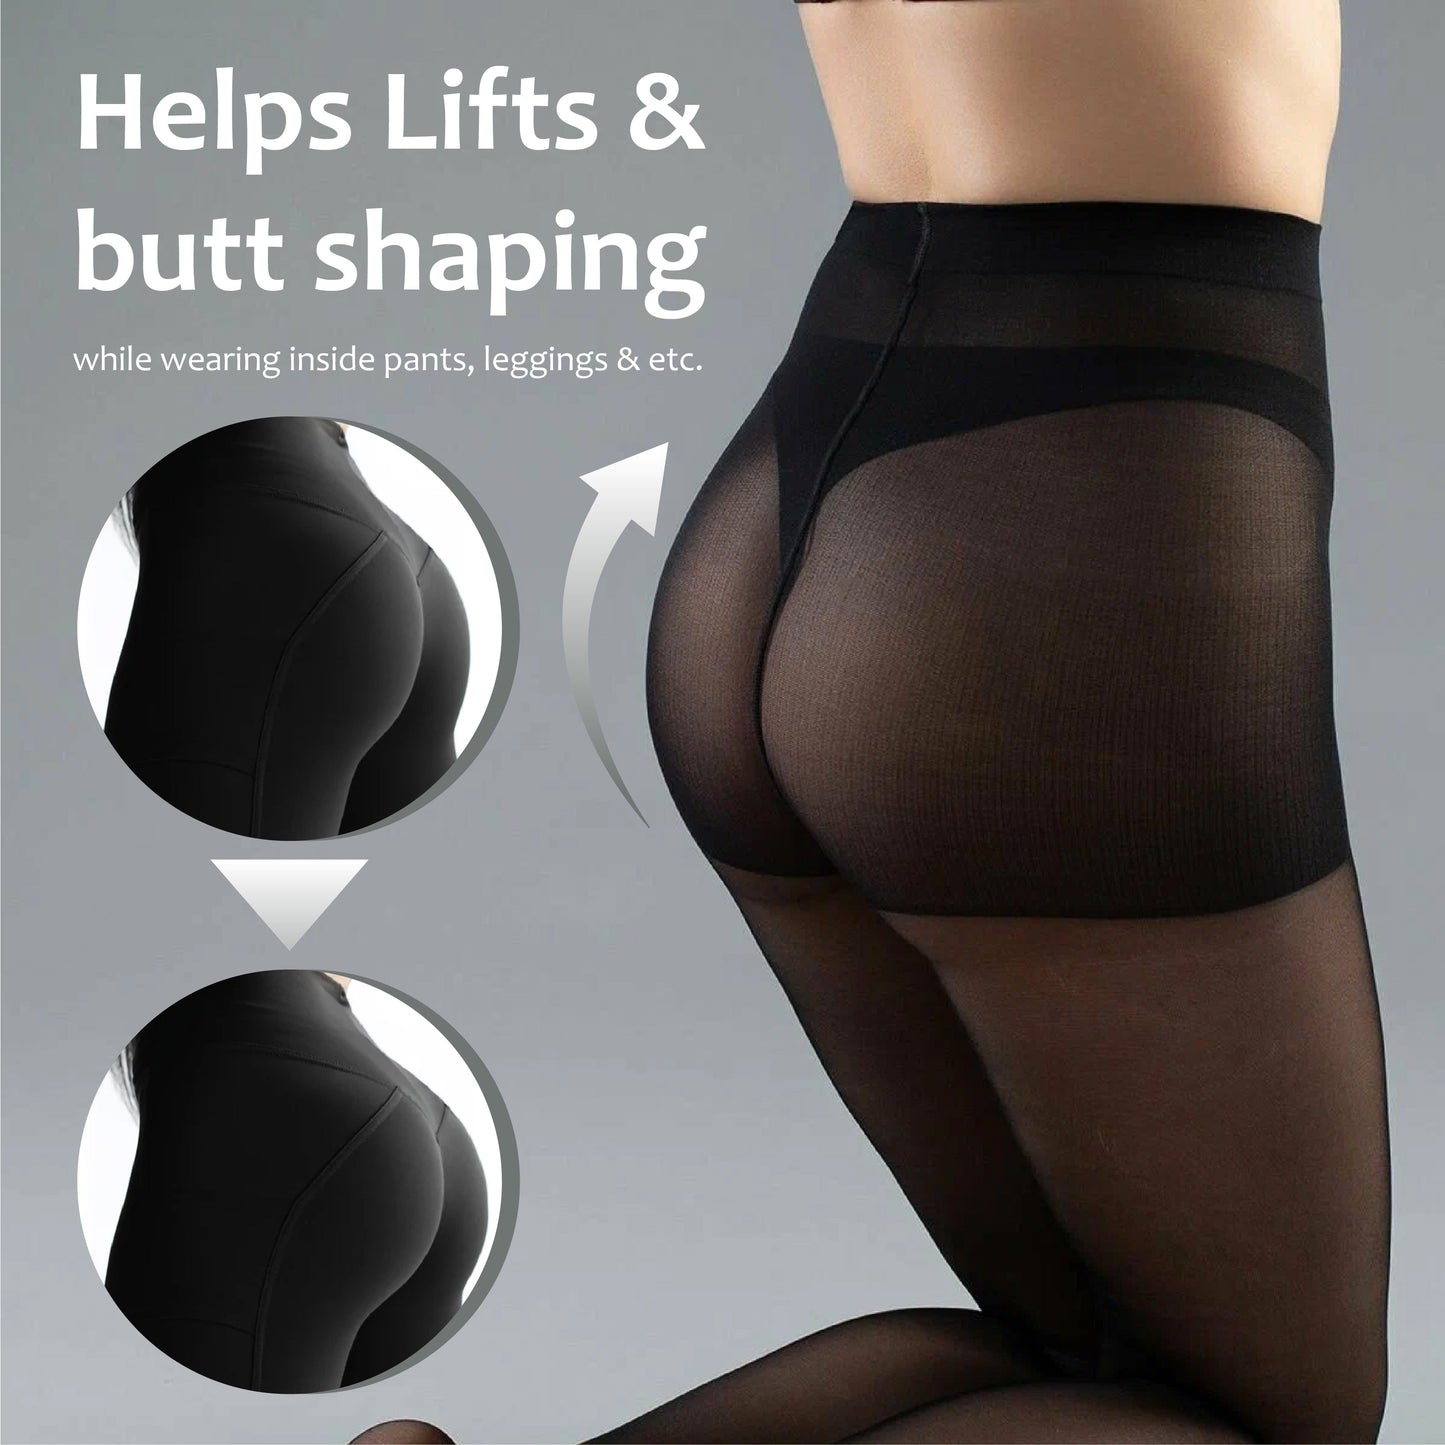 3 in1 LegShaping ButtLift Tights